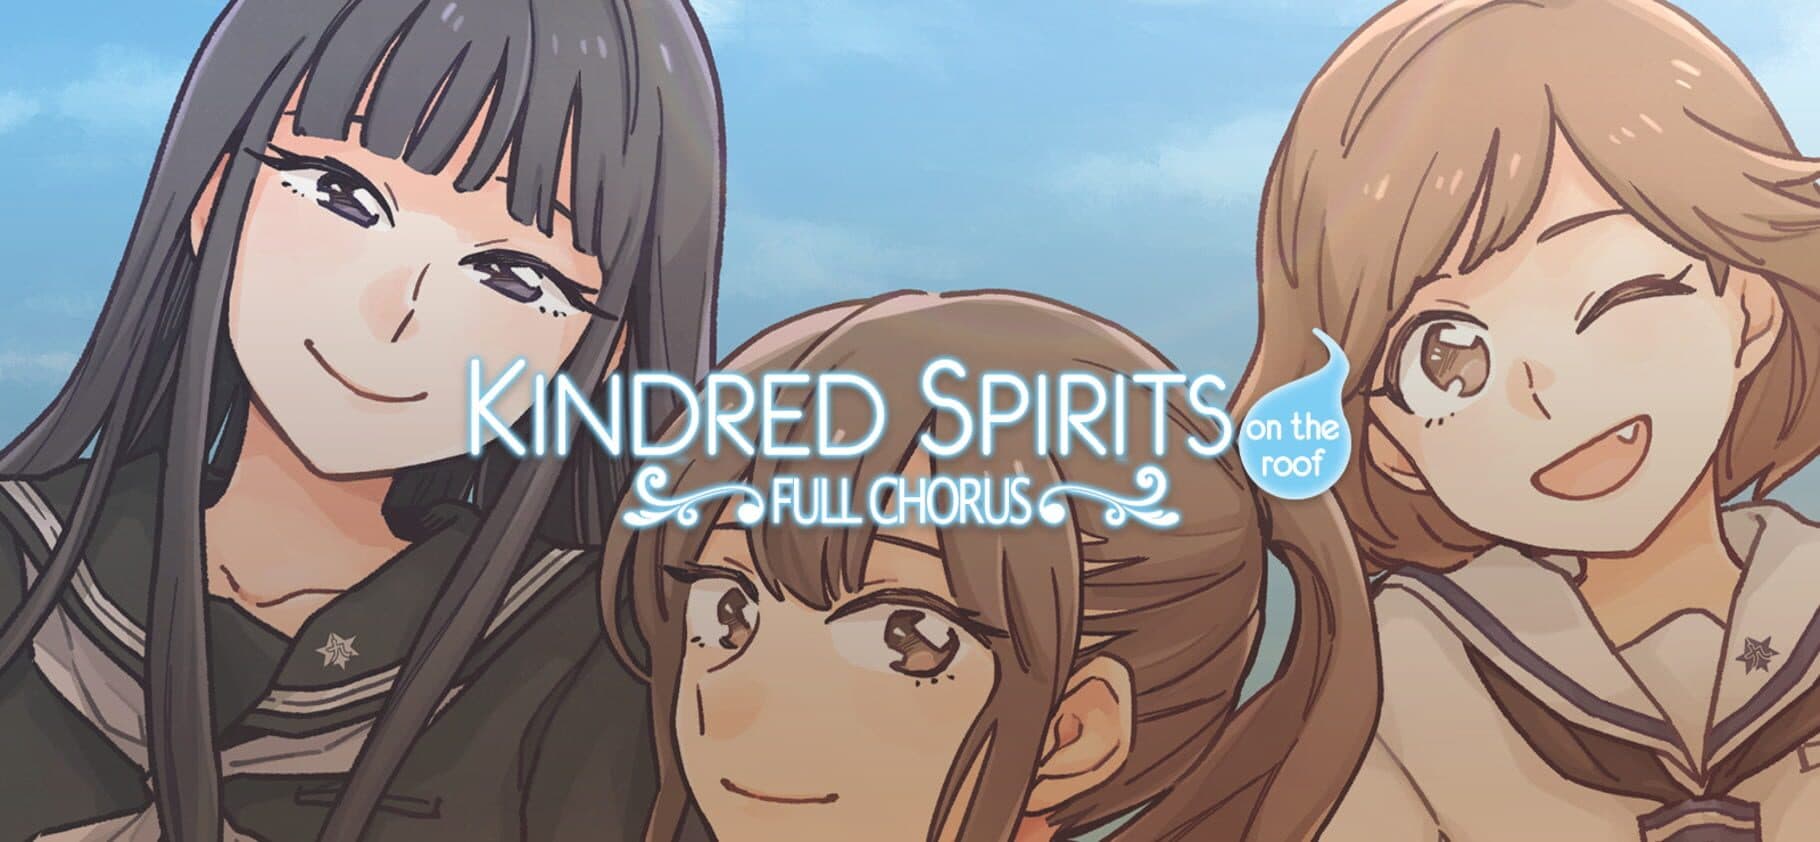 Kindred Spirits on the Roof: Full Chorus Image